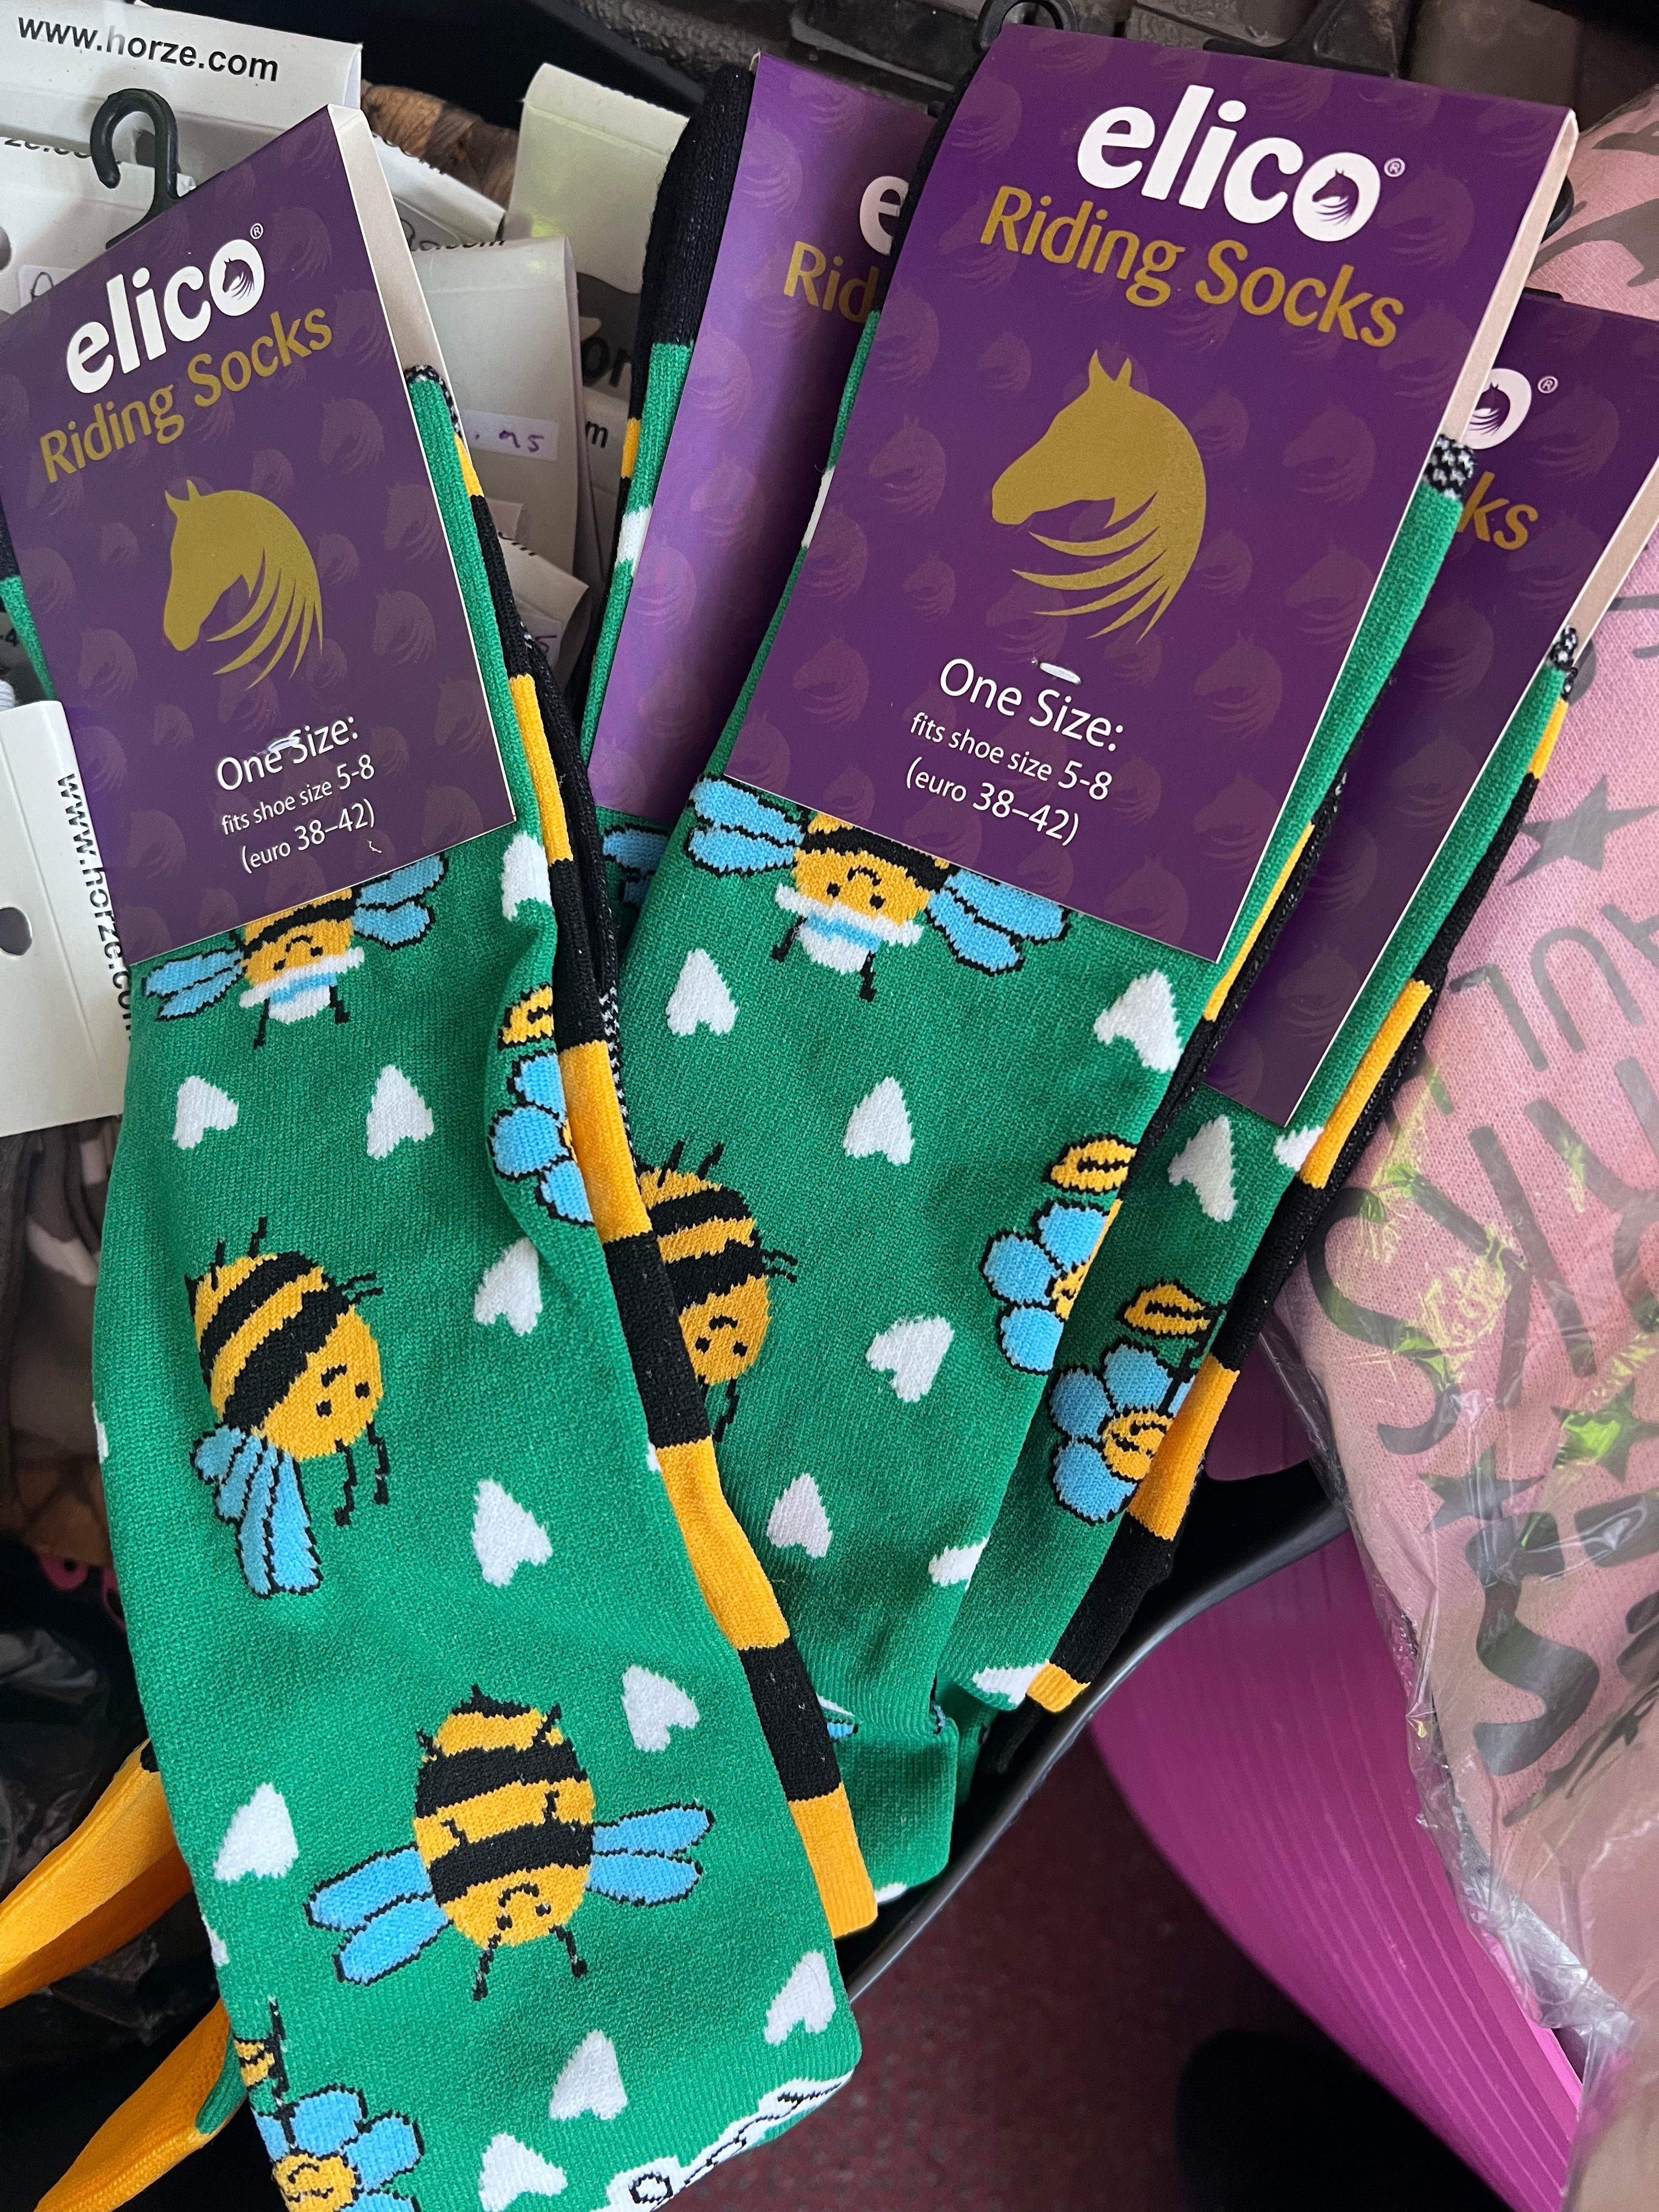 Elico Bumble Bee Long Riding Socks